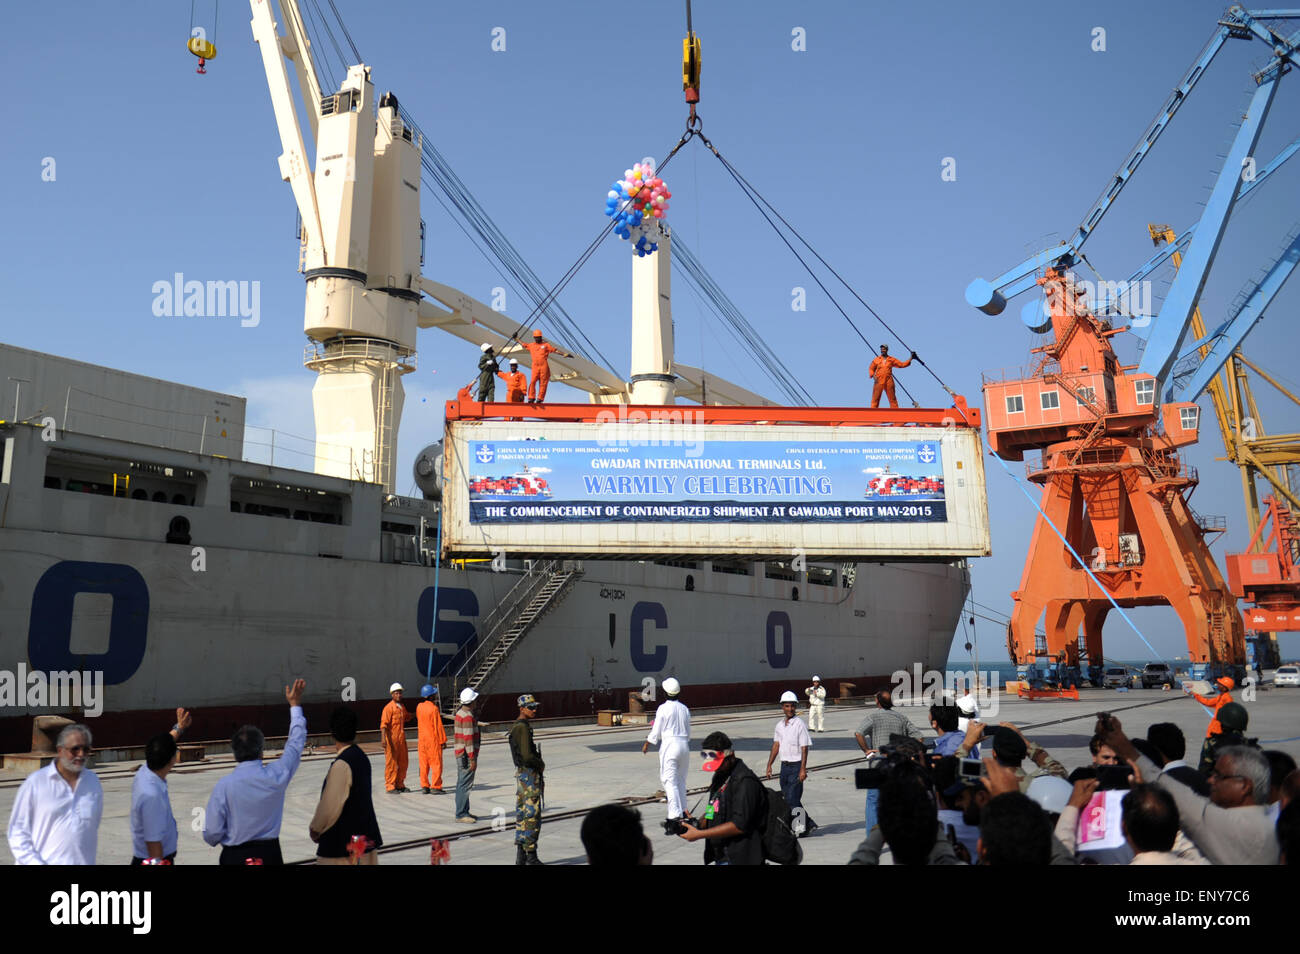 Karachi, Pakistan. 12th May, 2015. A container is loaded to a ship during the inaugration ceremony of container service at a pier of Gwadar Port, southwestern Pakistan, on May 11, 2015. Gwadar Port, a warm-water, deep-sea port, is located at the mouth of the Persian Gulf in Gwadar of Pakistan's Baloschistan province. China and Pakistan agreed to build China-Pakistan Economic Corridor (CPEC) to connect the Pakistani port with Kashgar city in China's Xinjiang Uygur Autonomous Region. Stock Photo